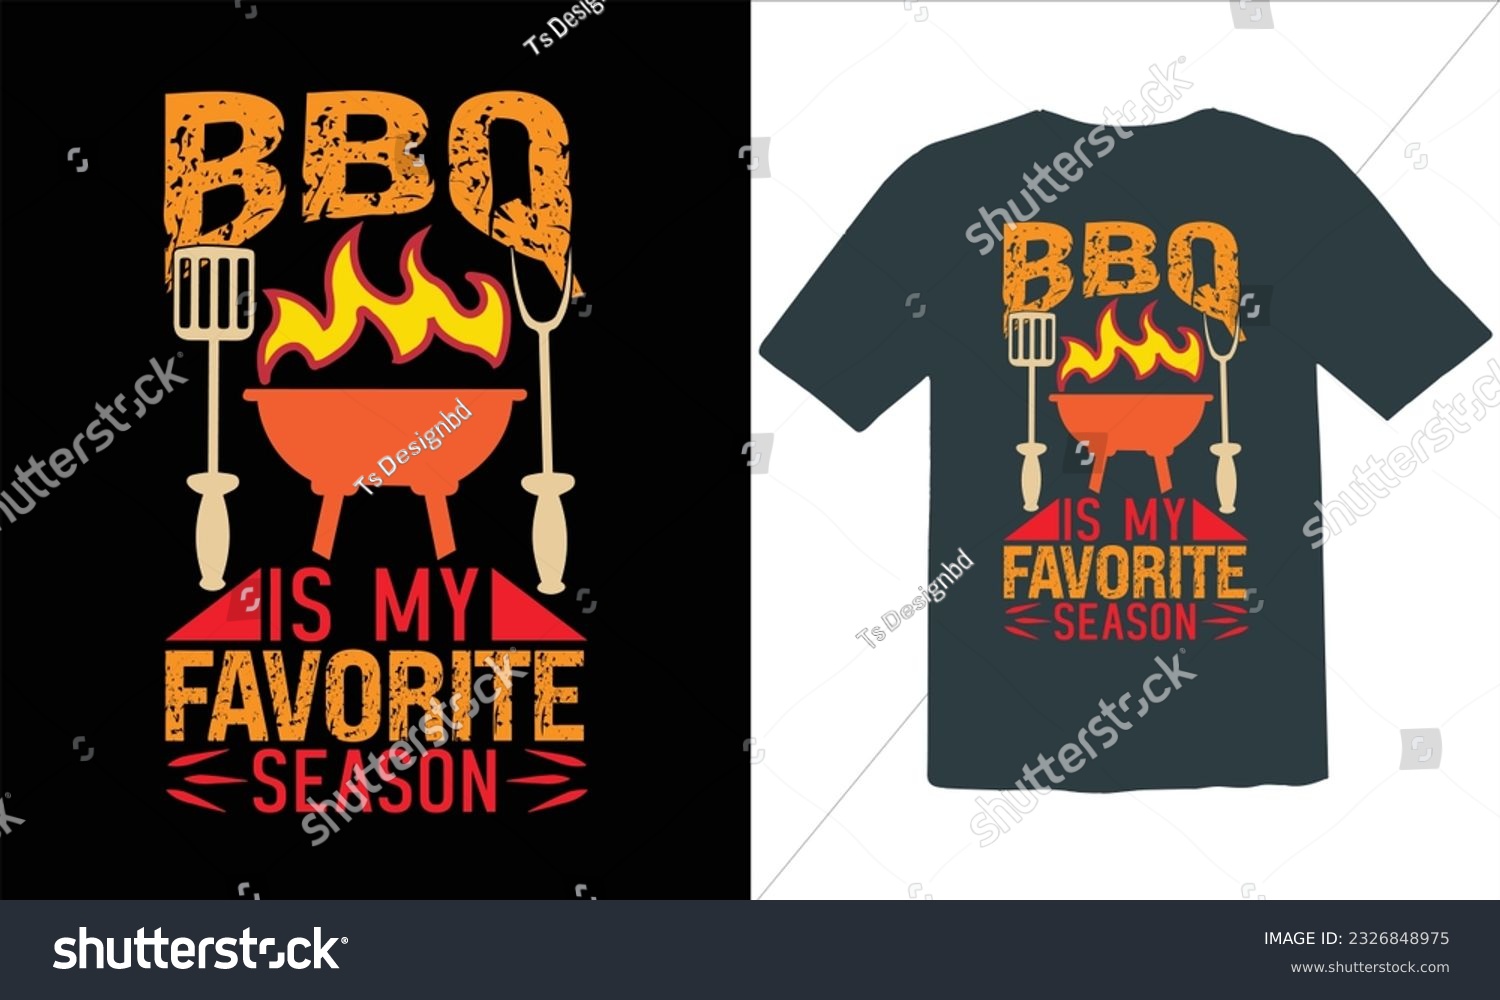 SVG of  Bbq Is My Favorite Season  T Shirt Design,BBQ T-shirt design,typography BBQ shirts design,BBQ Grilling shirts design vectors,Barbeque t-shirt,Typography vector T-shirt design,Funny BBQ Shirt, svg